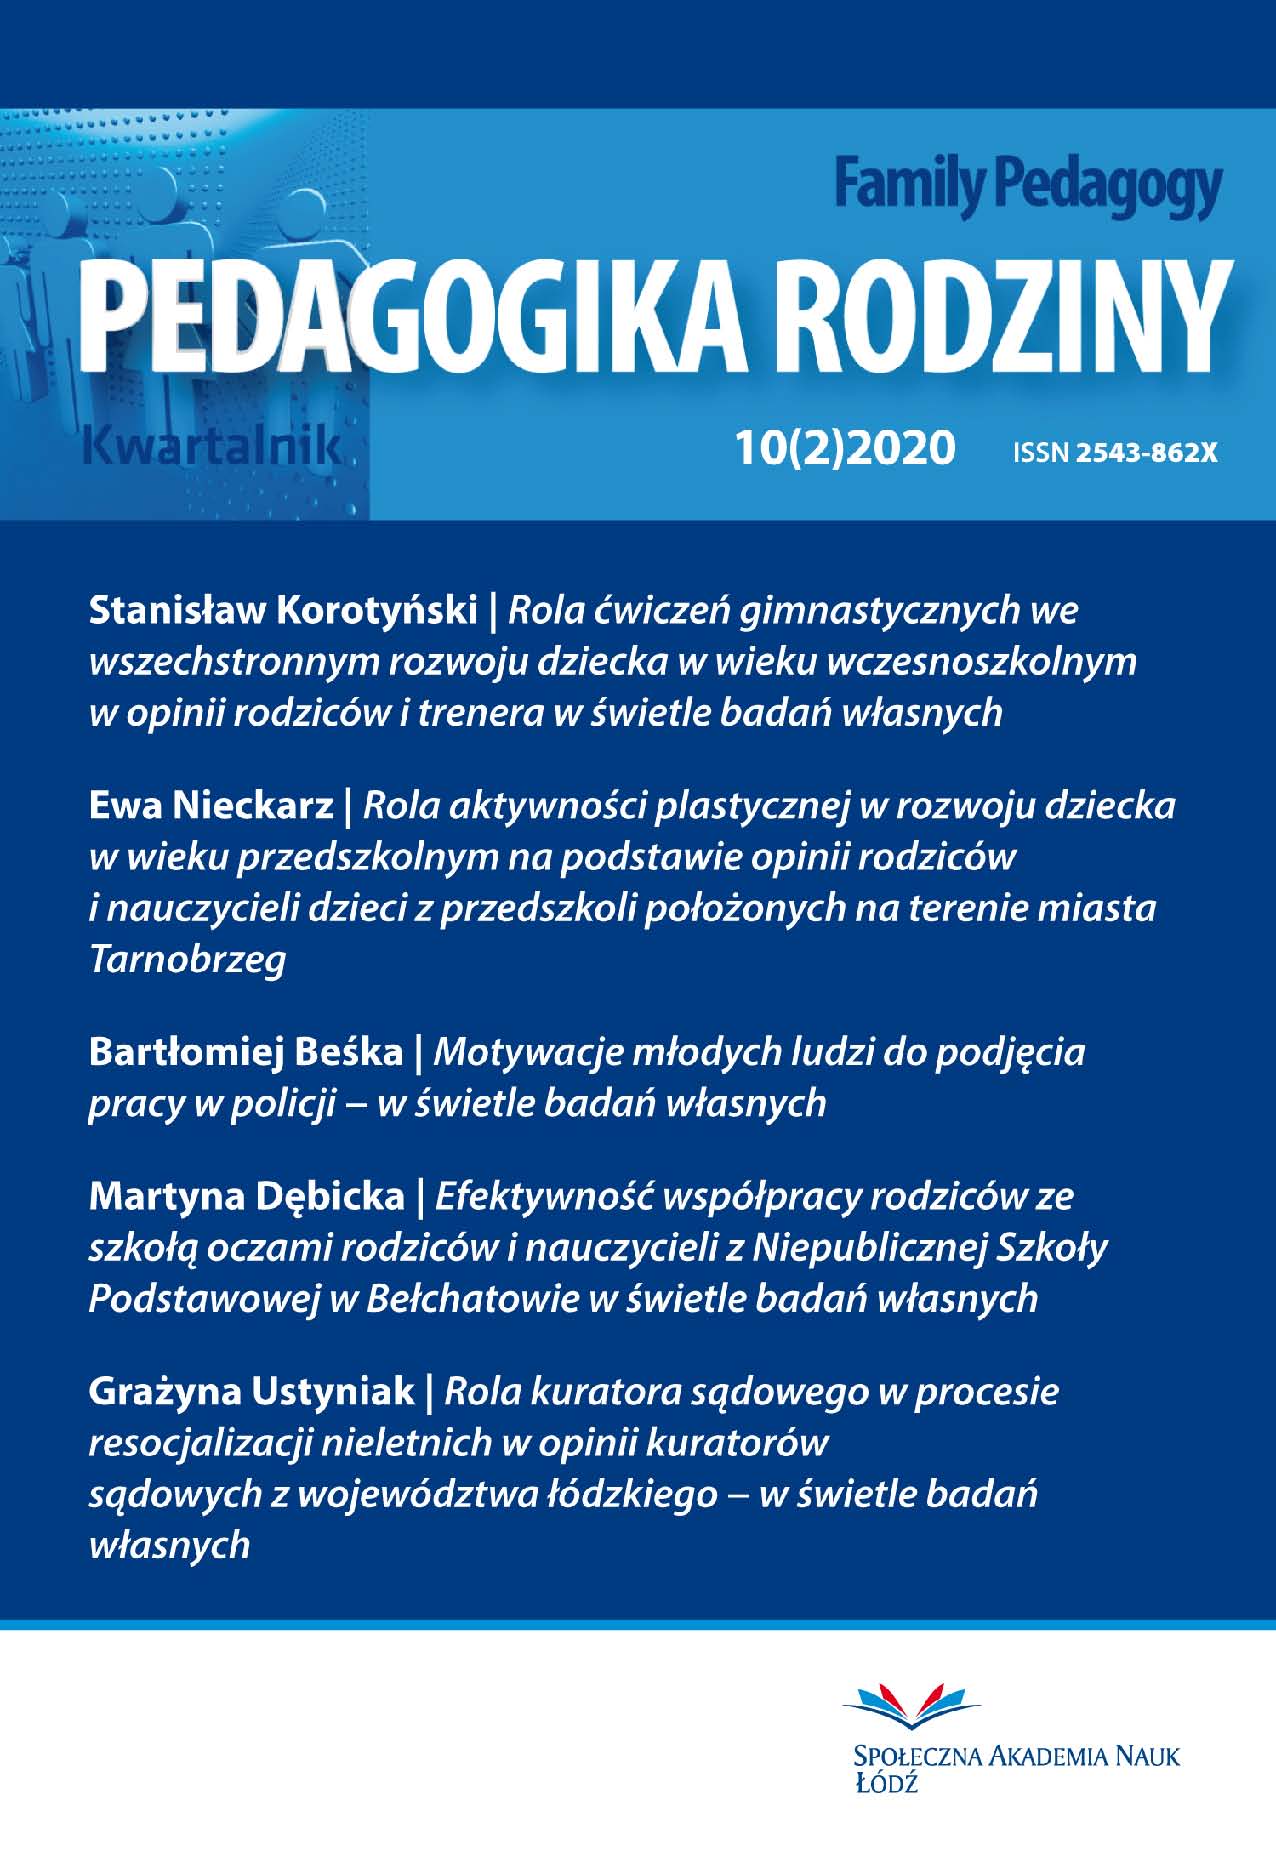 Effectiveness of Parent-school Cooperation through
the Eyes of Parents and Teachers from the Private Primary
School in Bełchatów in the Light of Own Research Cover Image